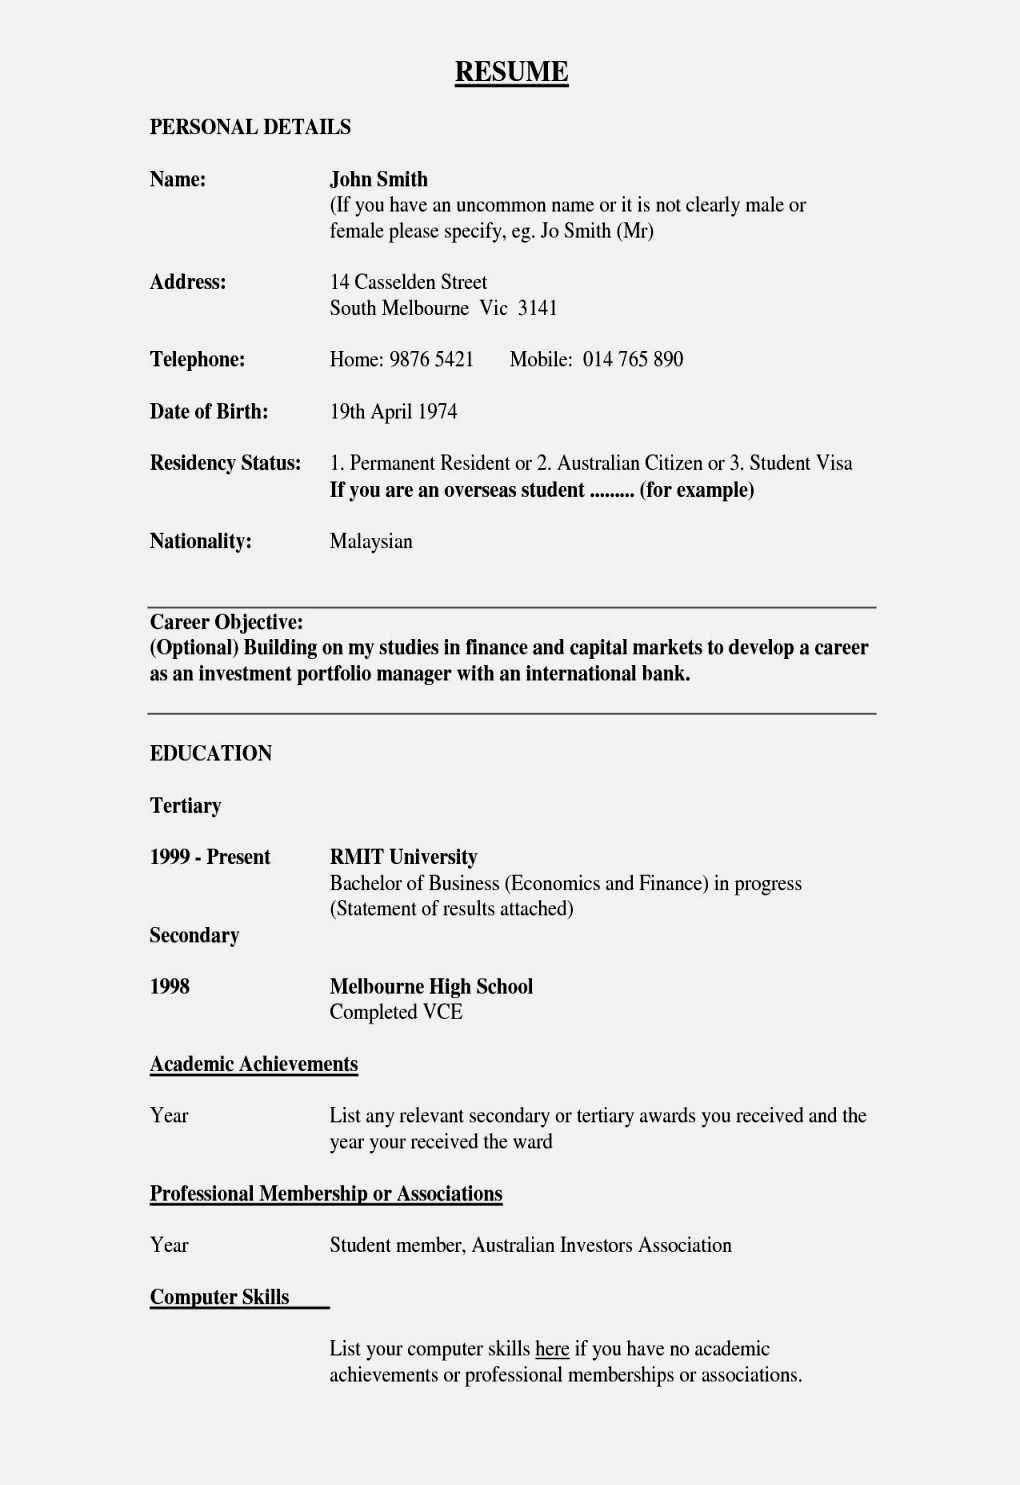 Sample Resume for Bank Jobs with No Experience Bank Teller Resume No Experienceâ¢ Printable Resume Template …